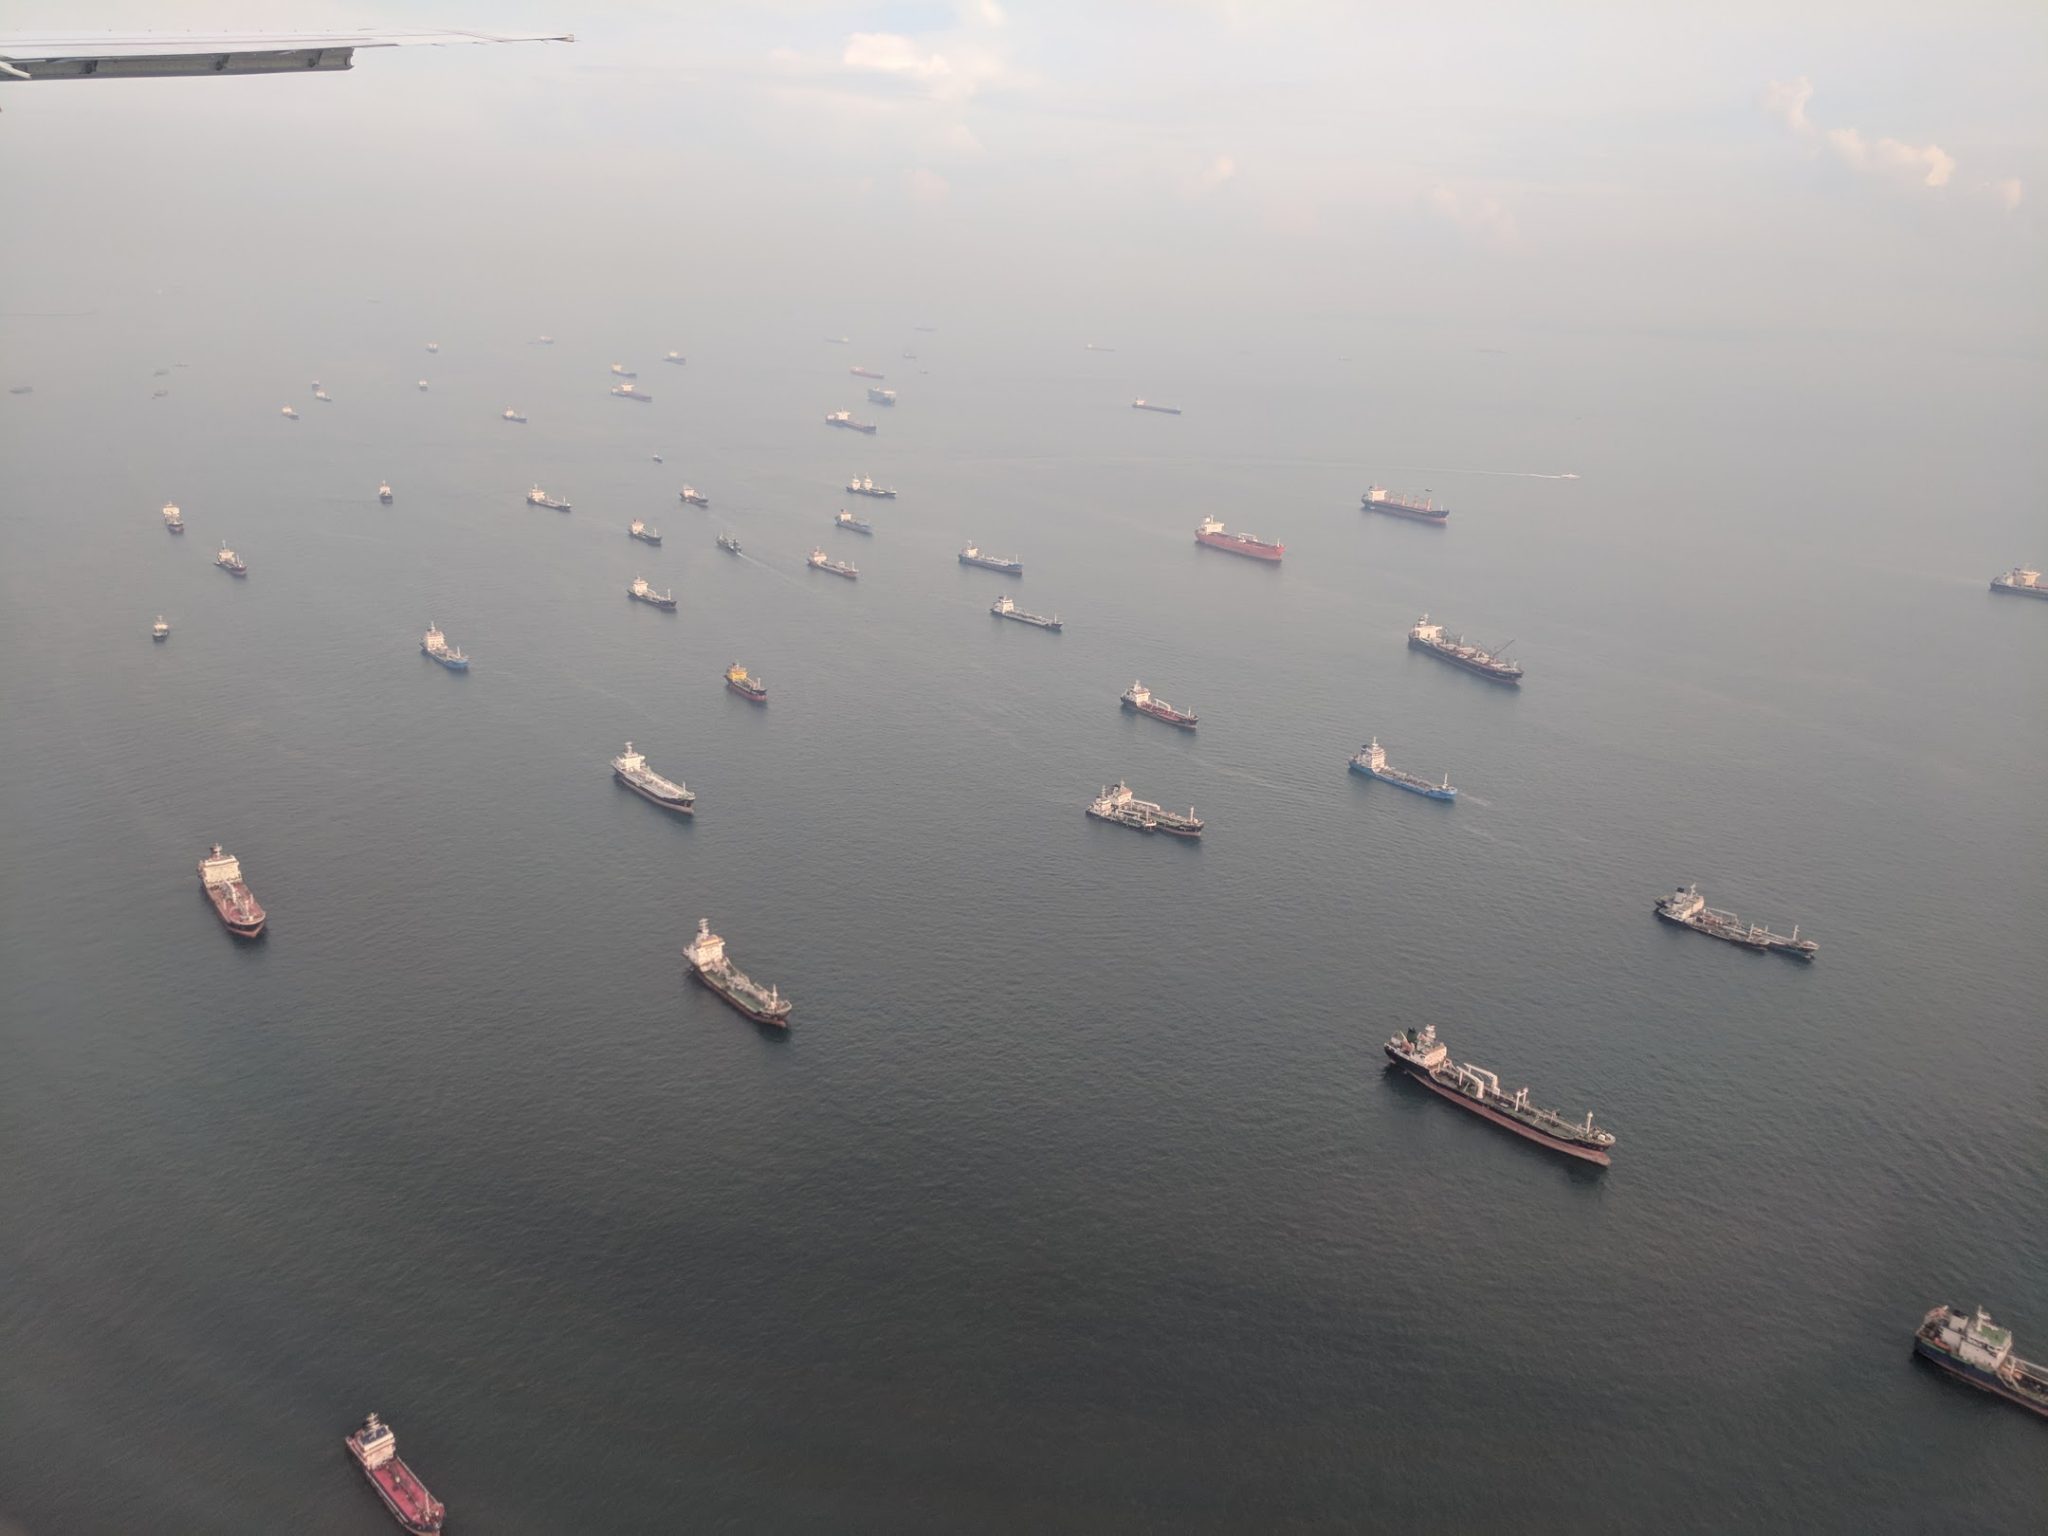 Cargo ships in the sea off the coast in Singapore. Photo by Michael Petch.